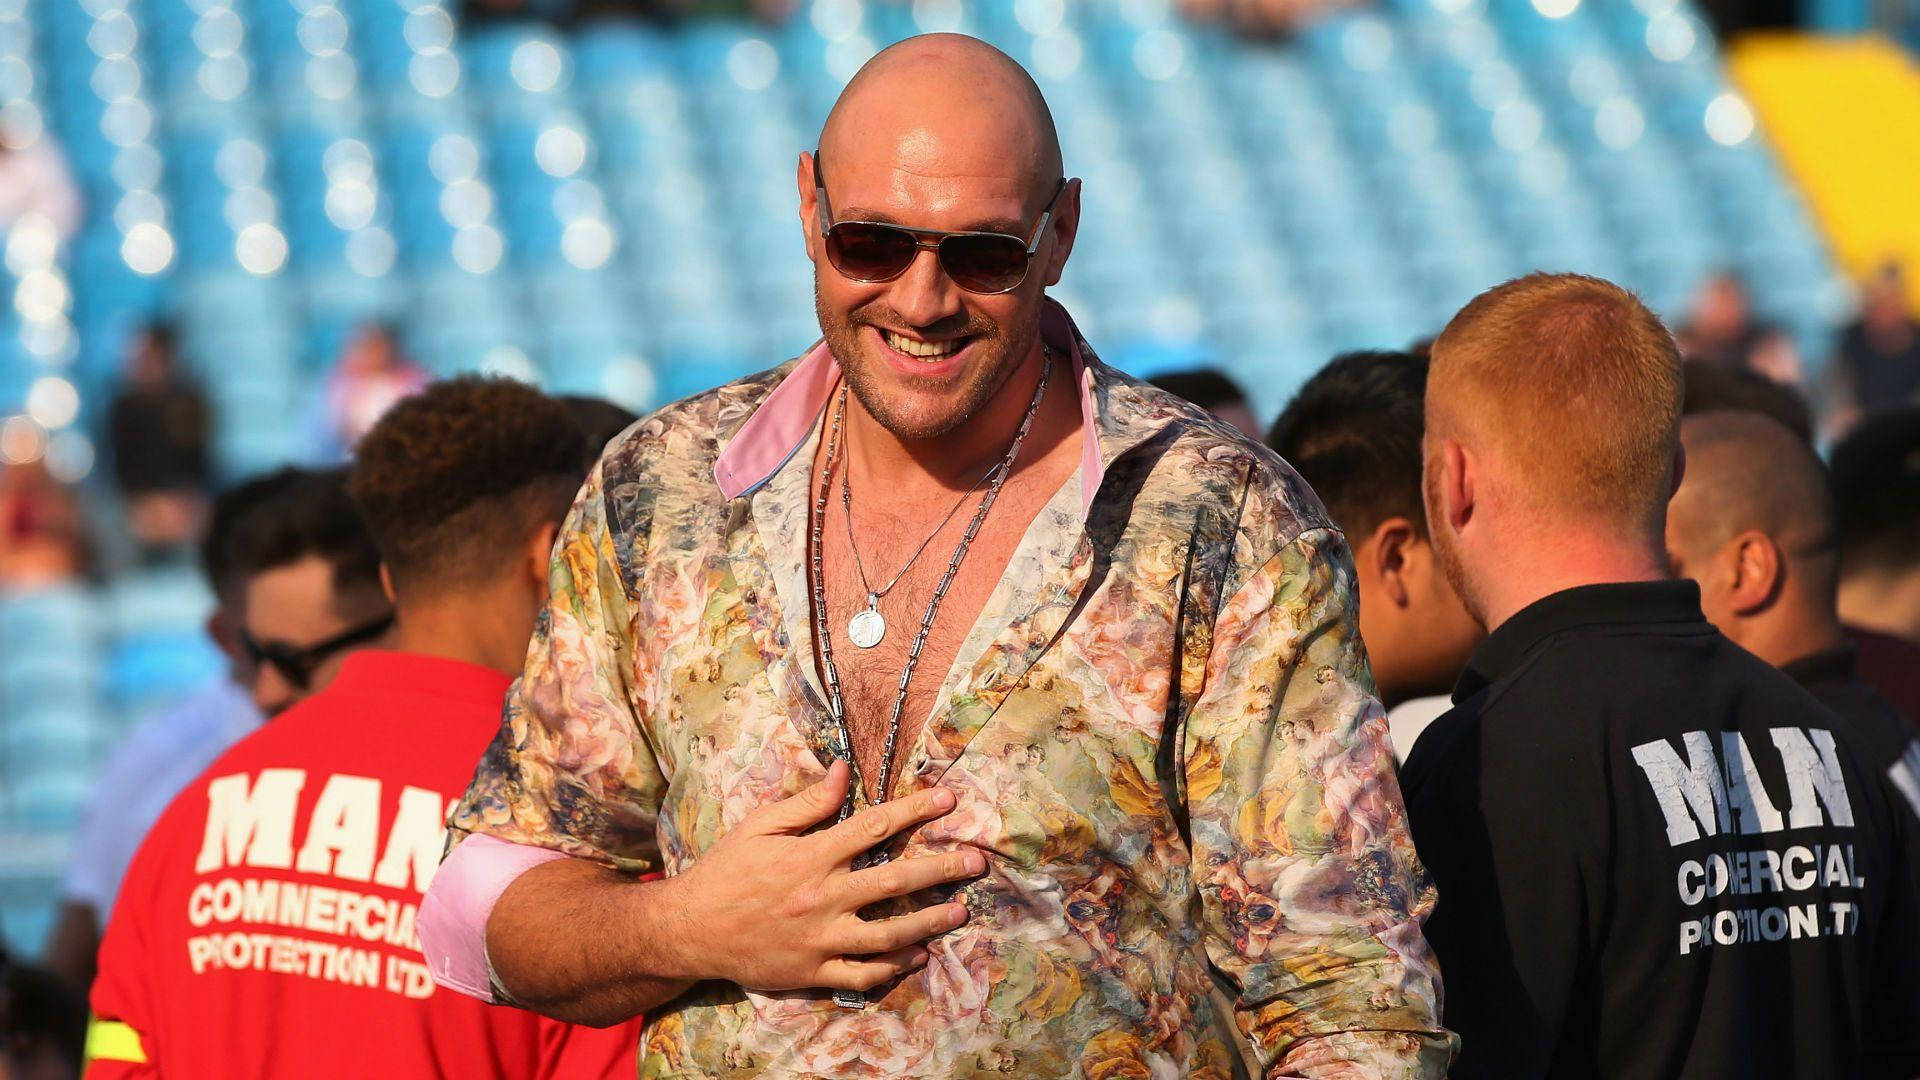 Tyson Fury As Cheerful Person Wallpaper